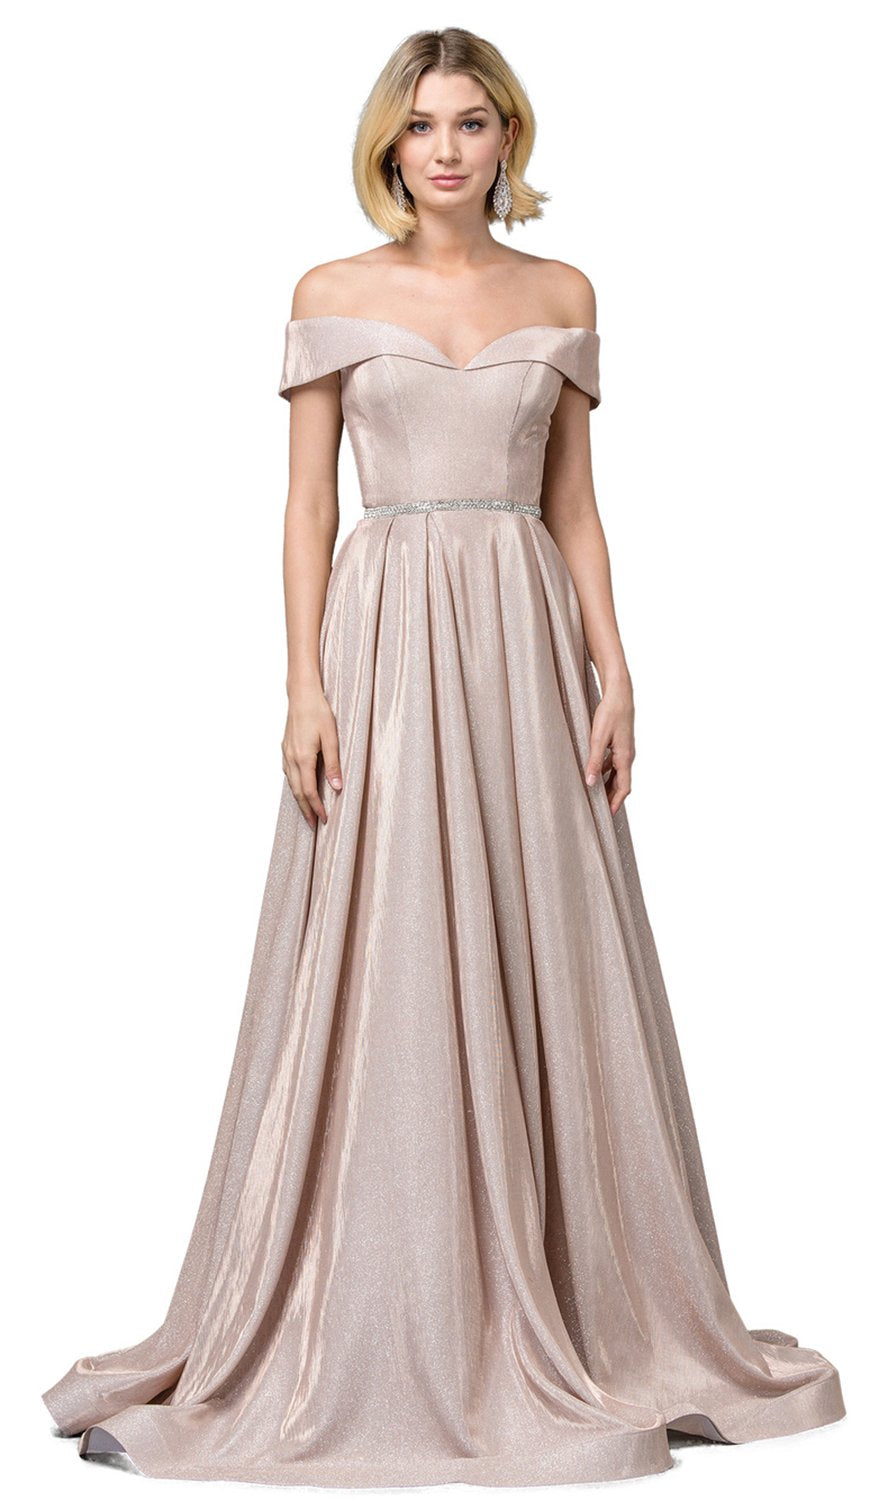 Dancing Queen - 2824 Iridescent Off Shoulder Gown with High Slit In Pink and Gold